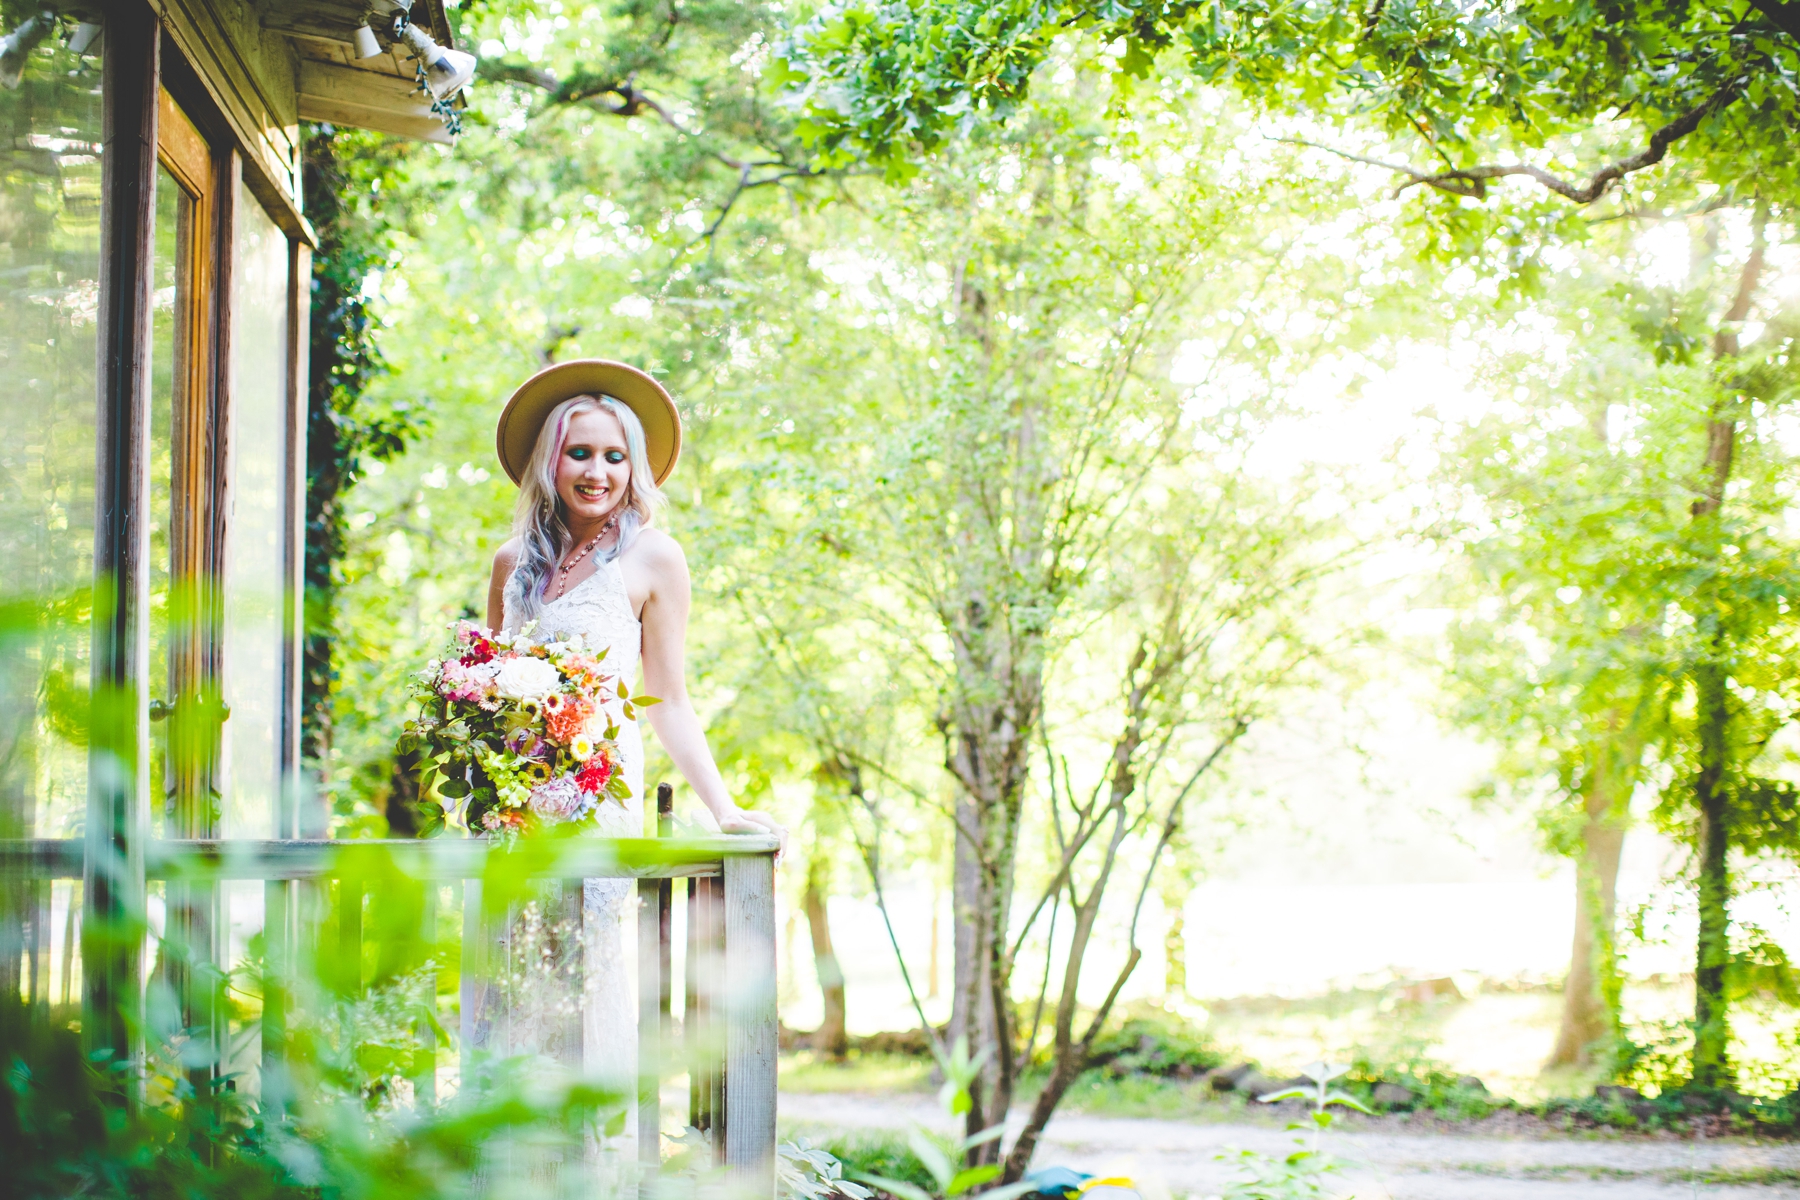 Creative Wedding Photography in Northwest Arkansas, Lissa Chandler Photography, Opal and June Styled Shoot